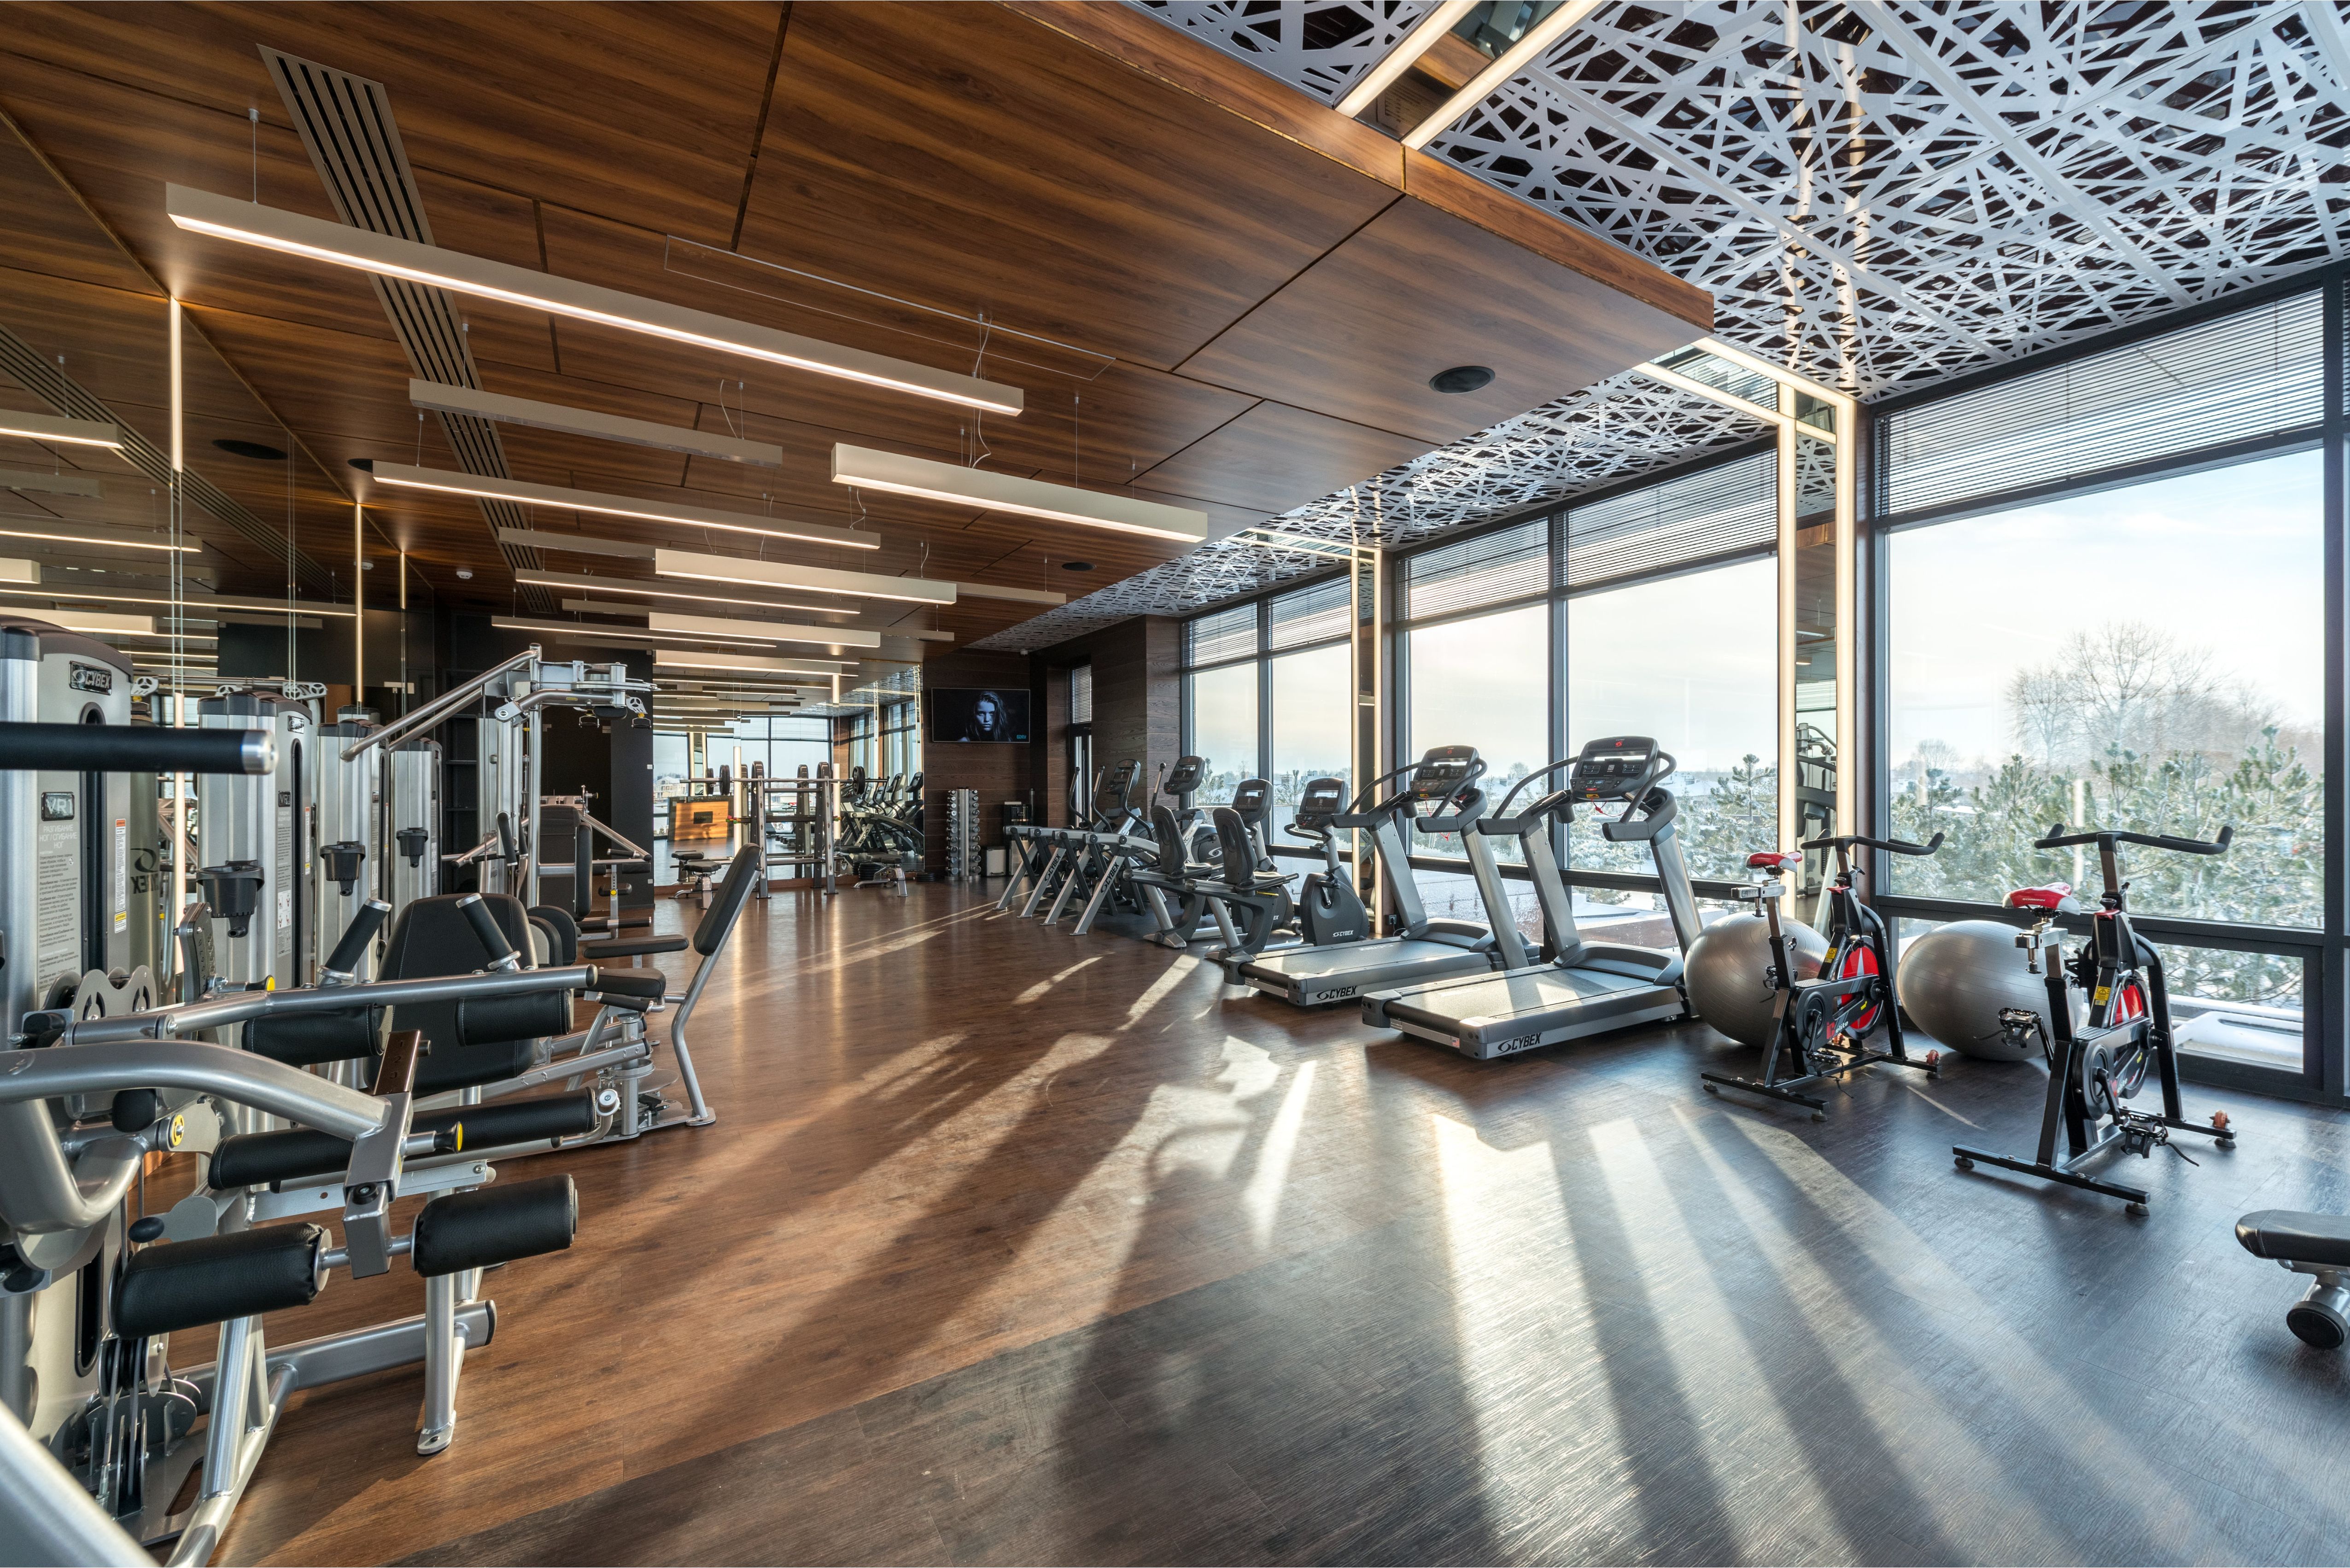 A gym with treadmills against large windows